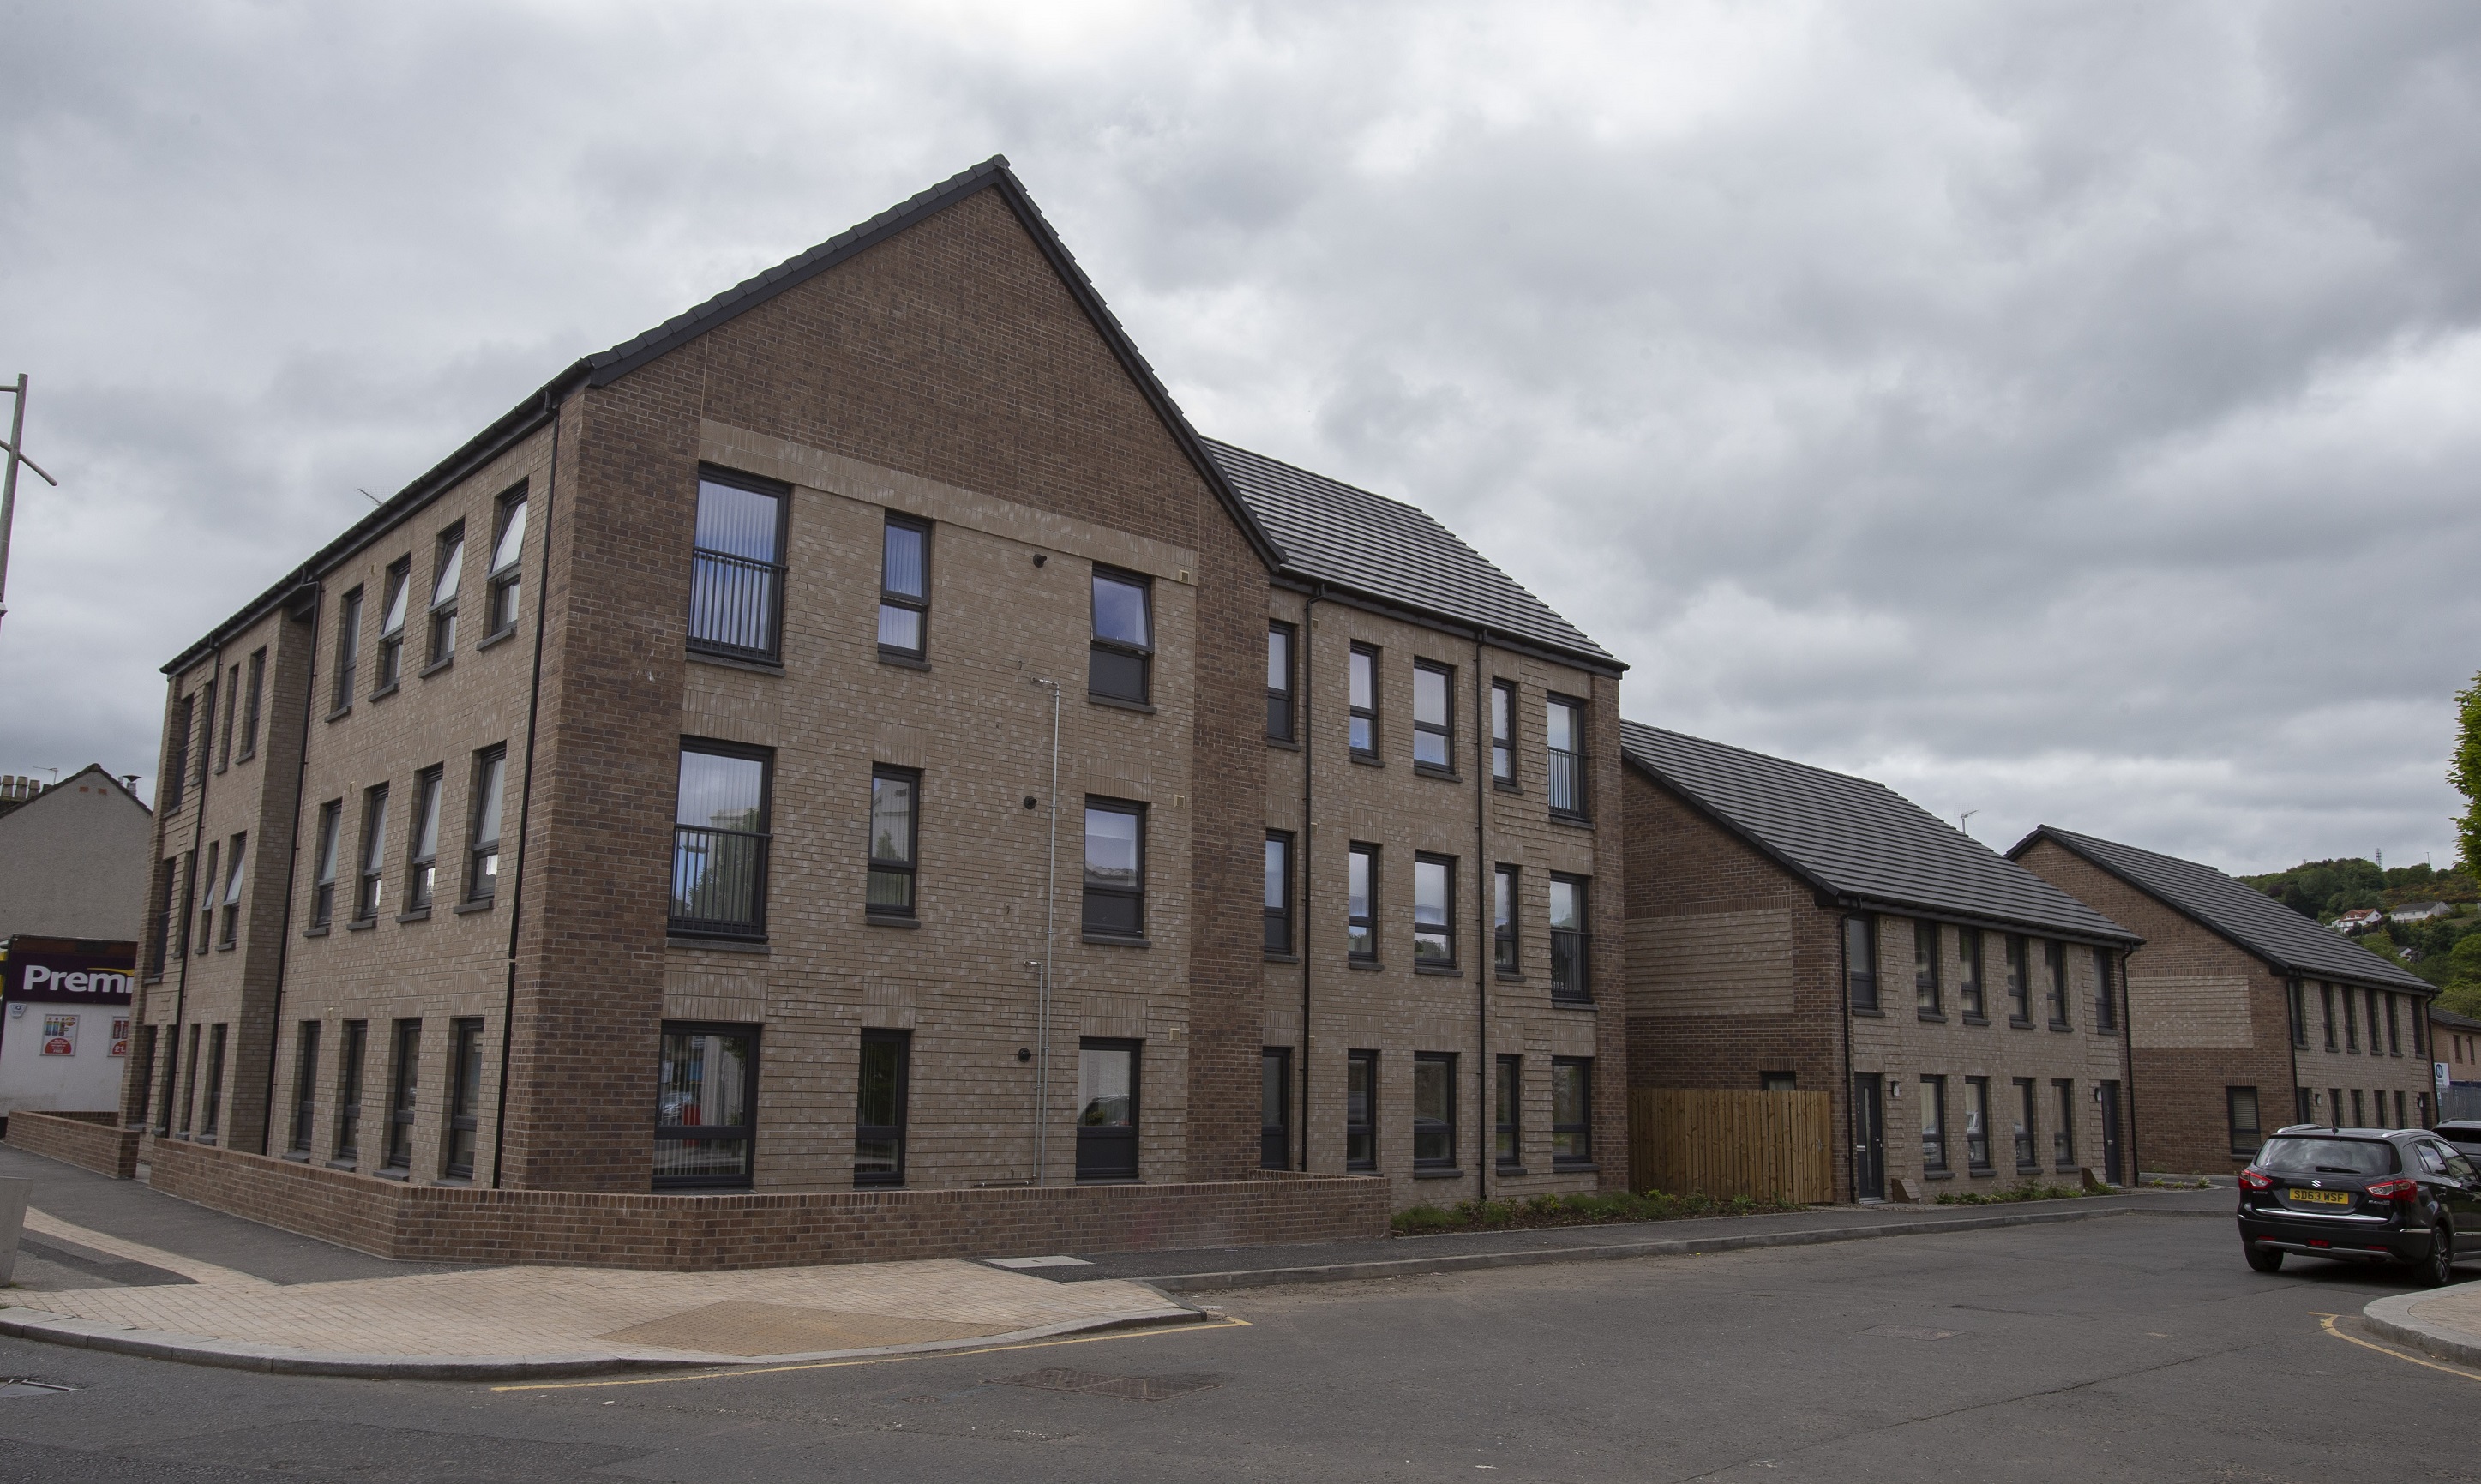 New East Renfrewshire council homes handed over to tenants